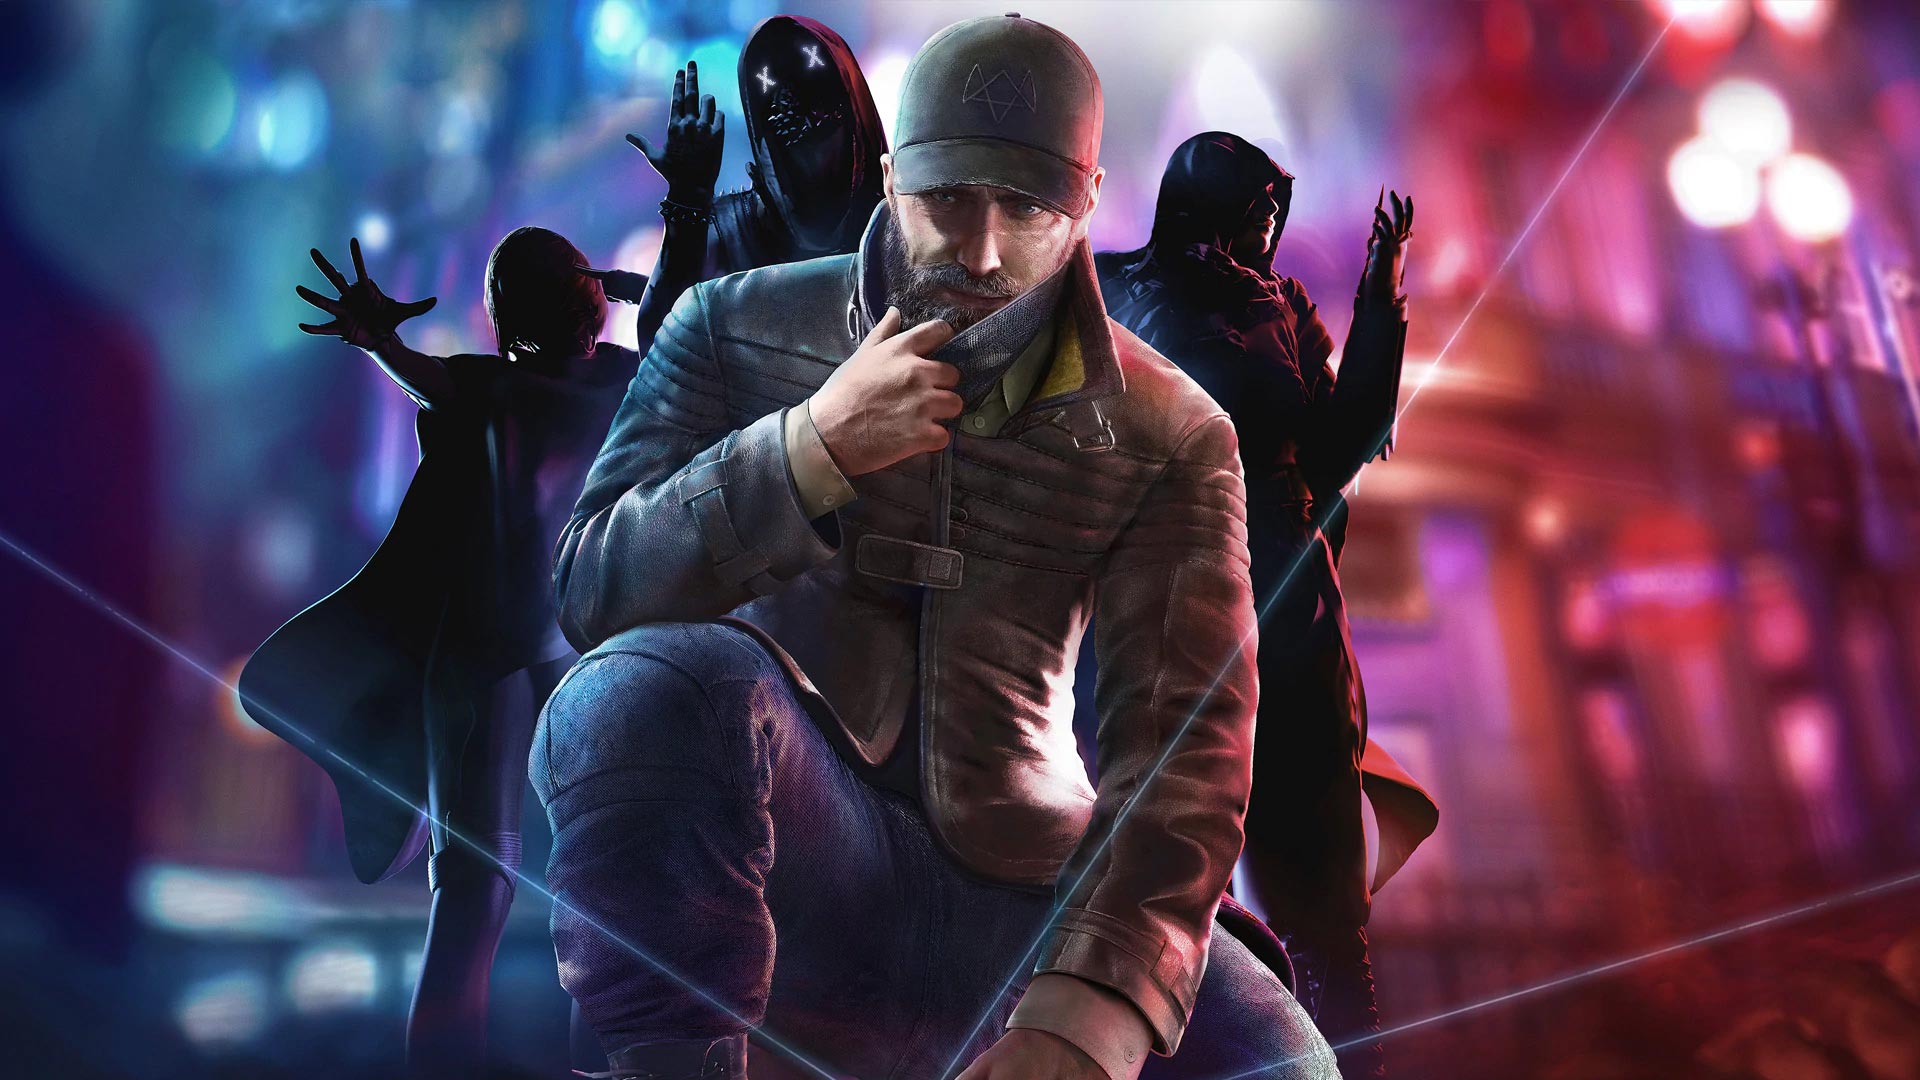 Watch Dogs: Legion on PC, | Xbox Series One, PS4 (CA) X|S, Ubisoft PS5, and Xbox